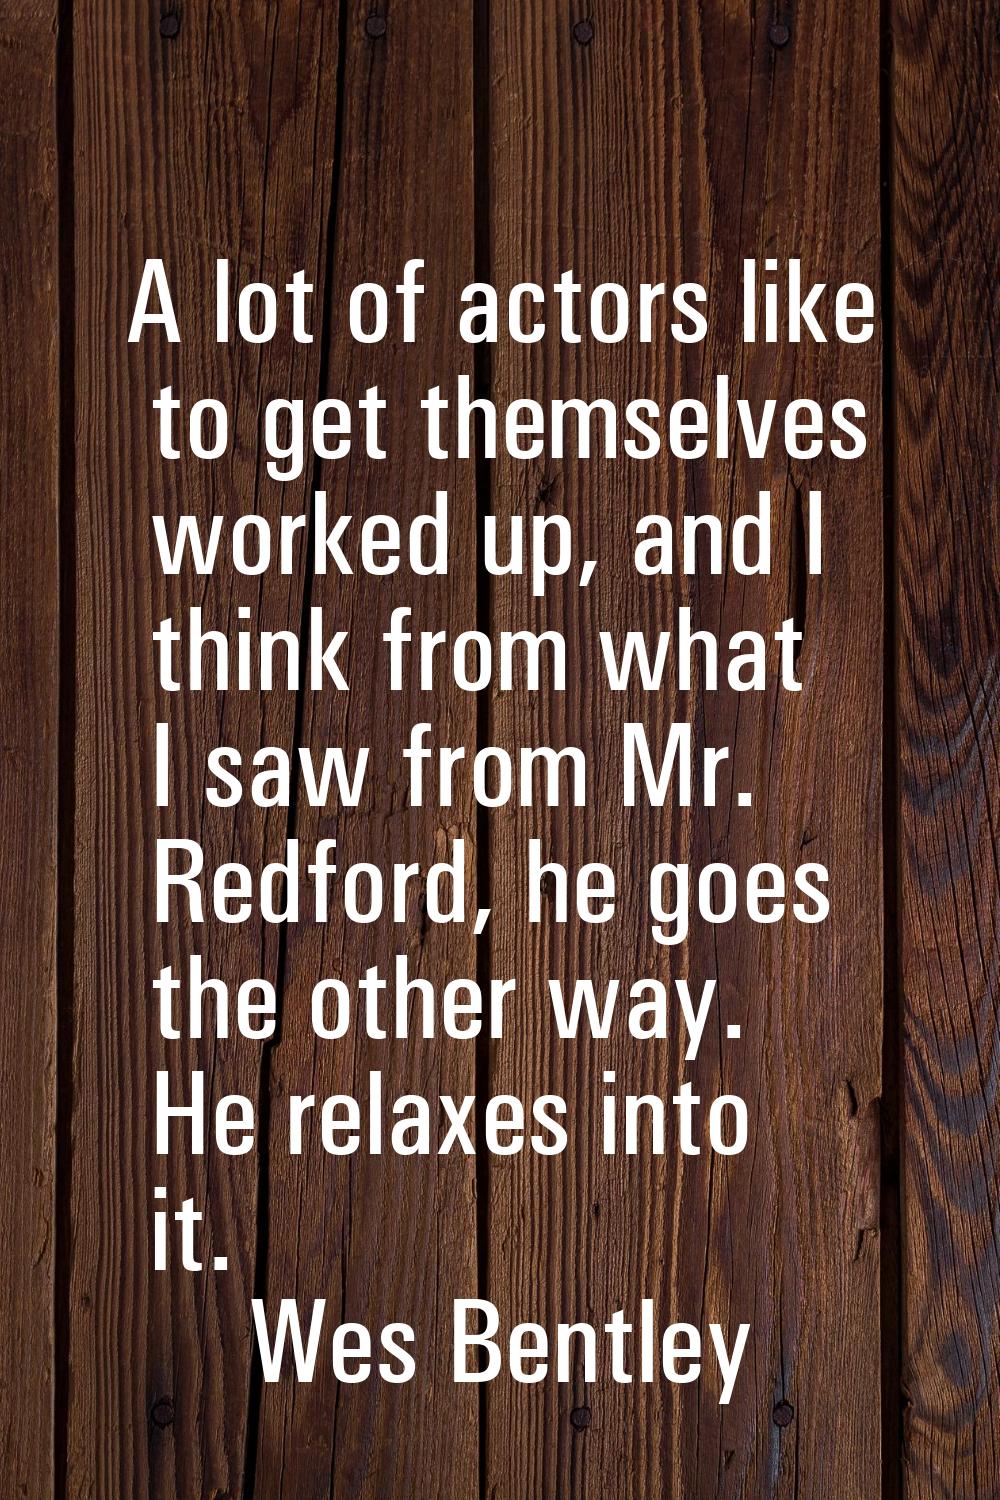 A lot of actors like to get themselves worked up, and I think from what I saw from Mr. Redford, he 